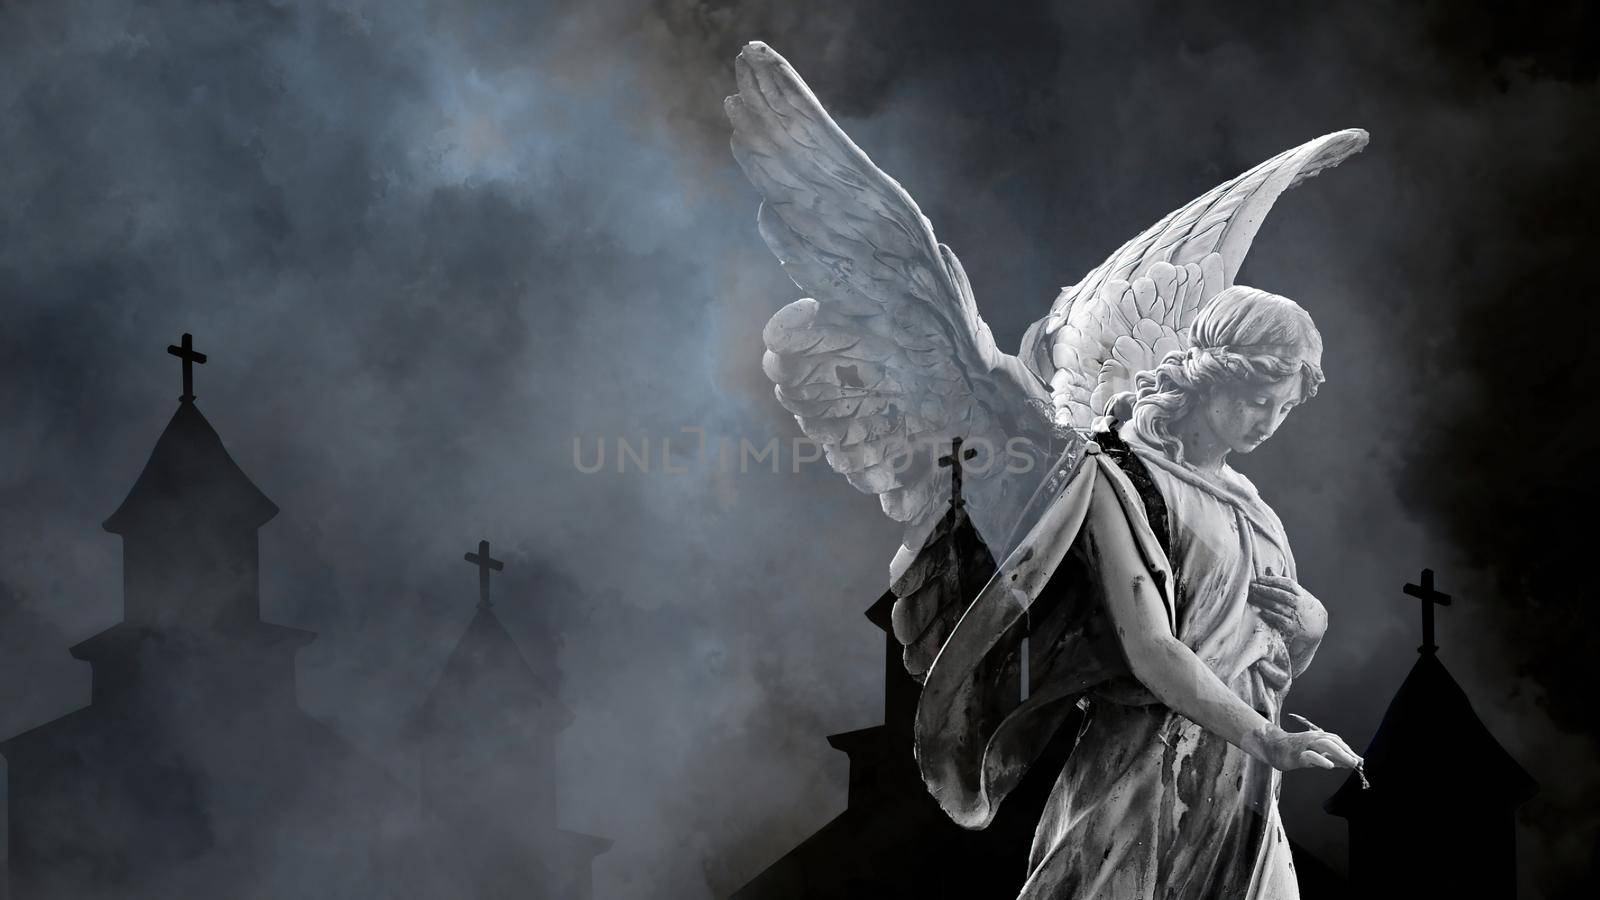 3d illustration - woman angel  with wings and old Churches silhouettes  in background by vitanovski